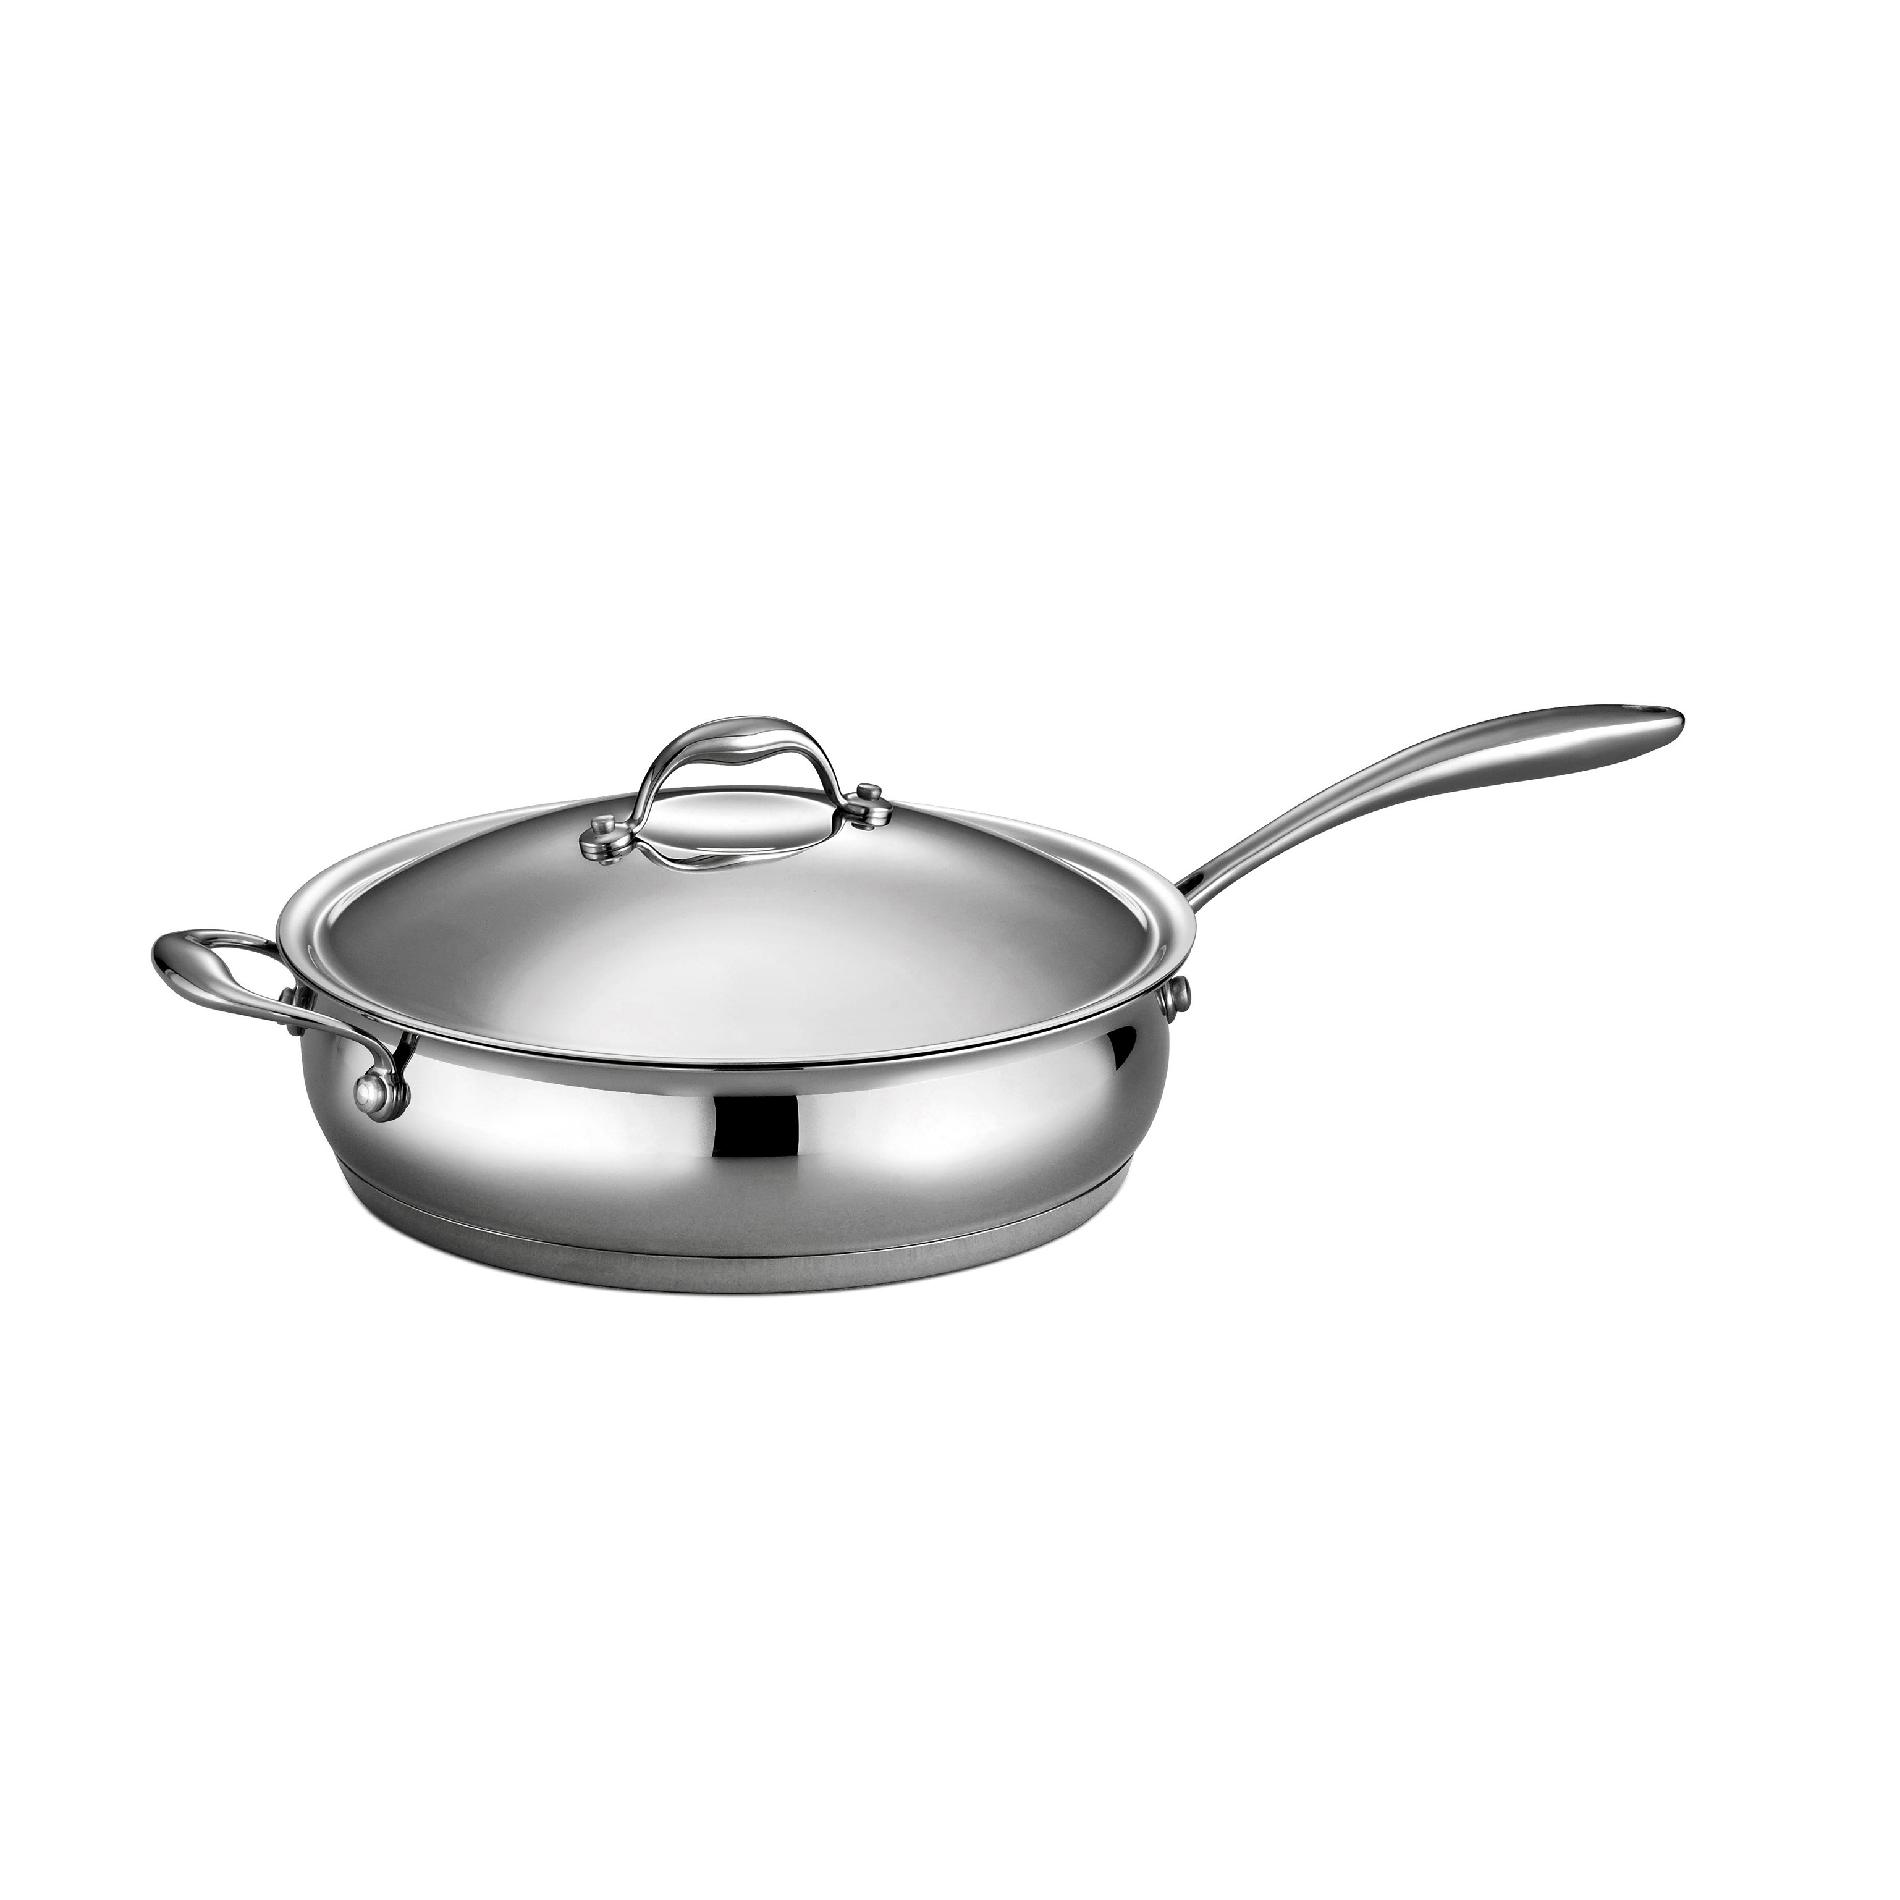 0016017019058 - GOURMET - DOMUS 18/10 STAINLESS STEEL 5 QT COVERED DEEP SAUTE PAN